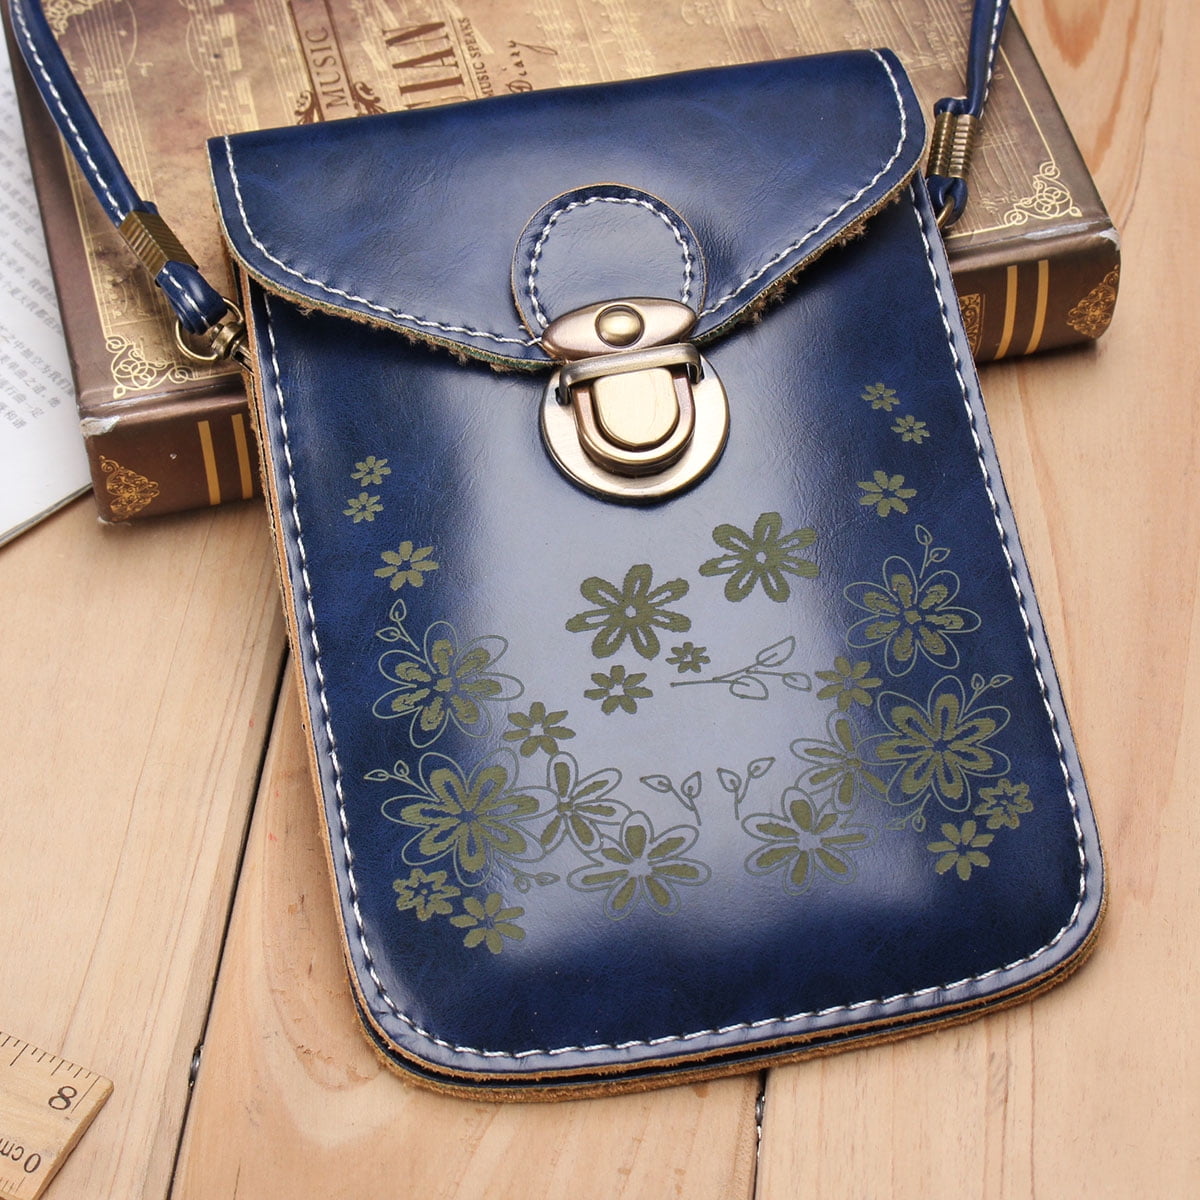 V.I.P. - 5 Colors Flower Women Vintage Wallet Purse Coin Cell Phone Mobile Mini Crossbody ...